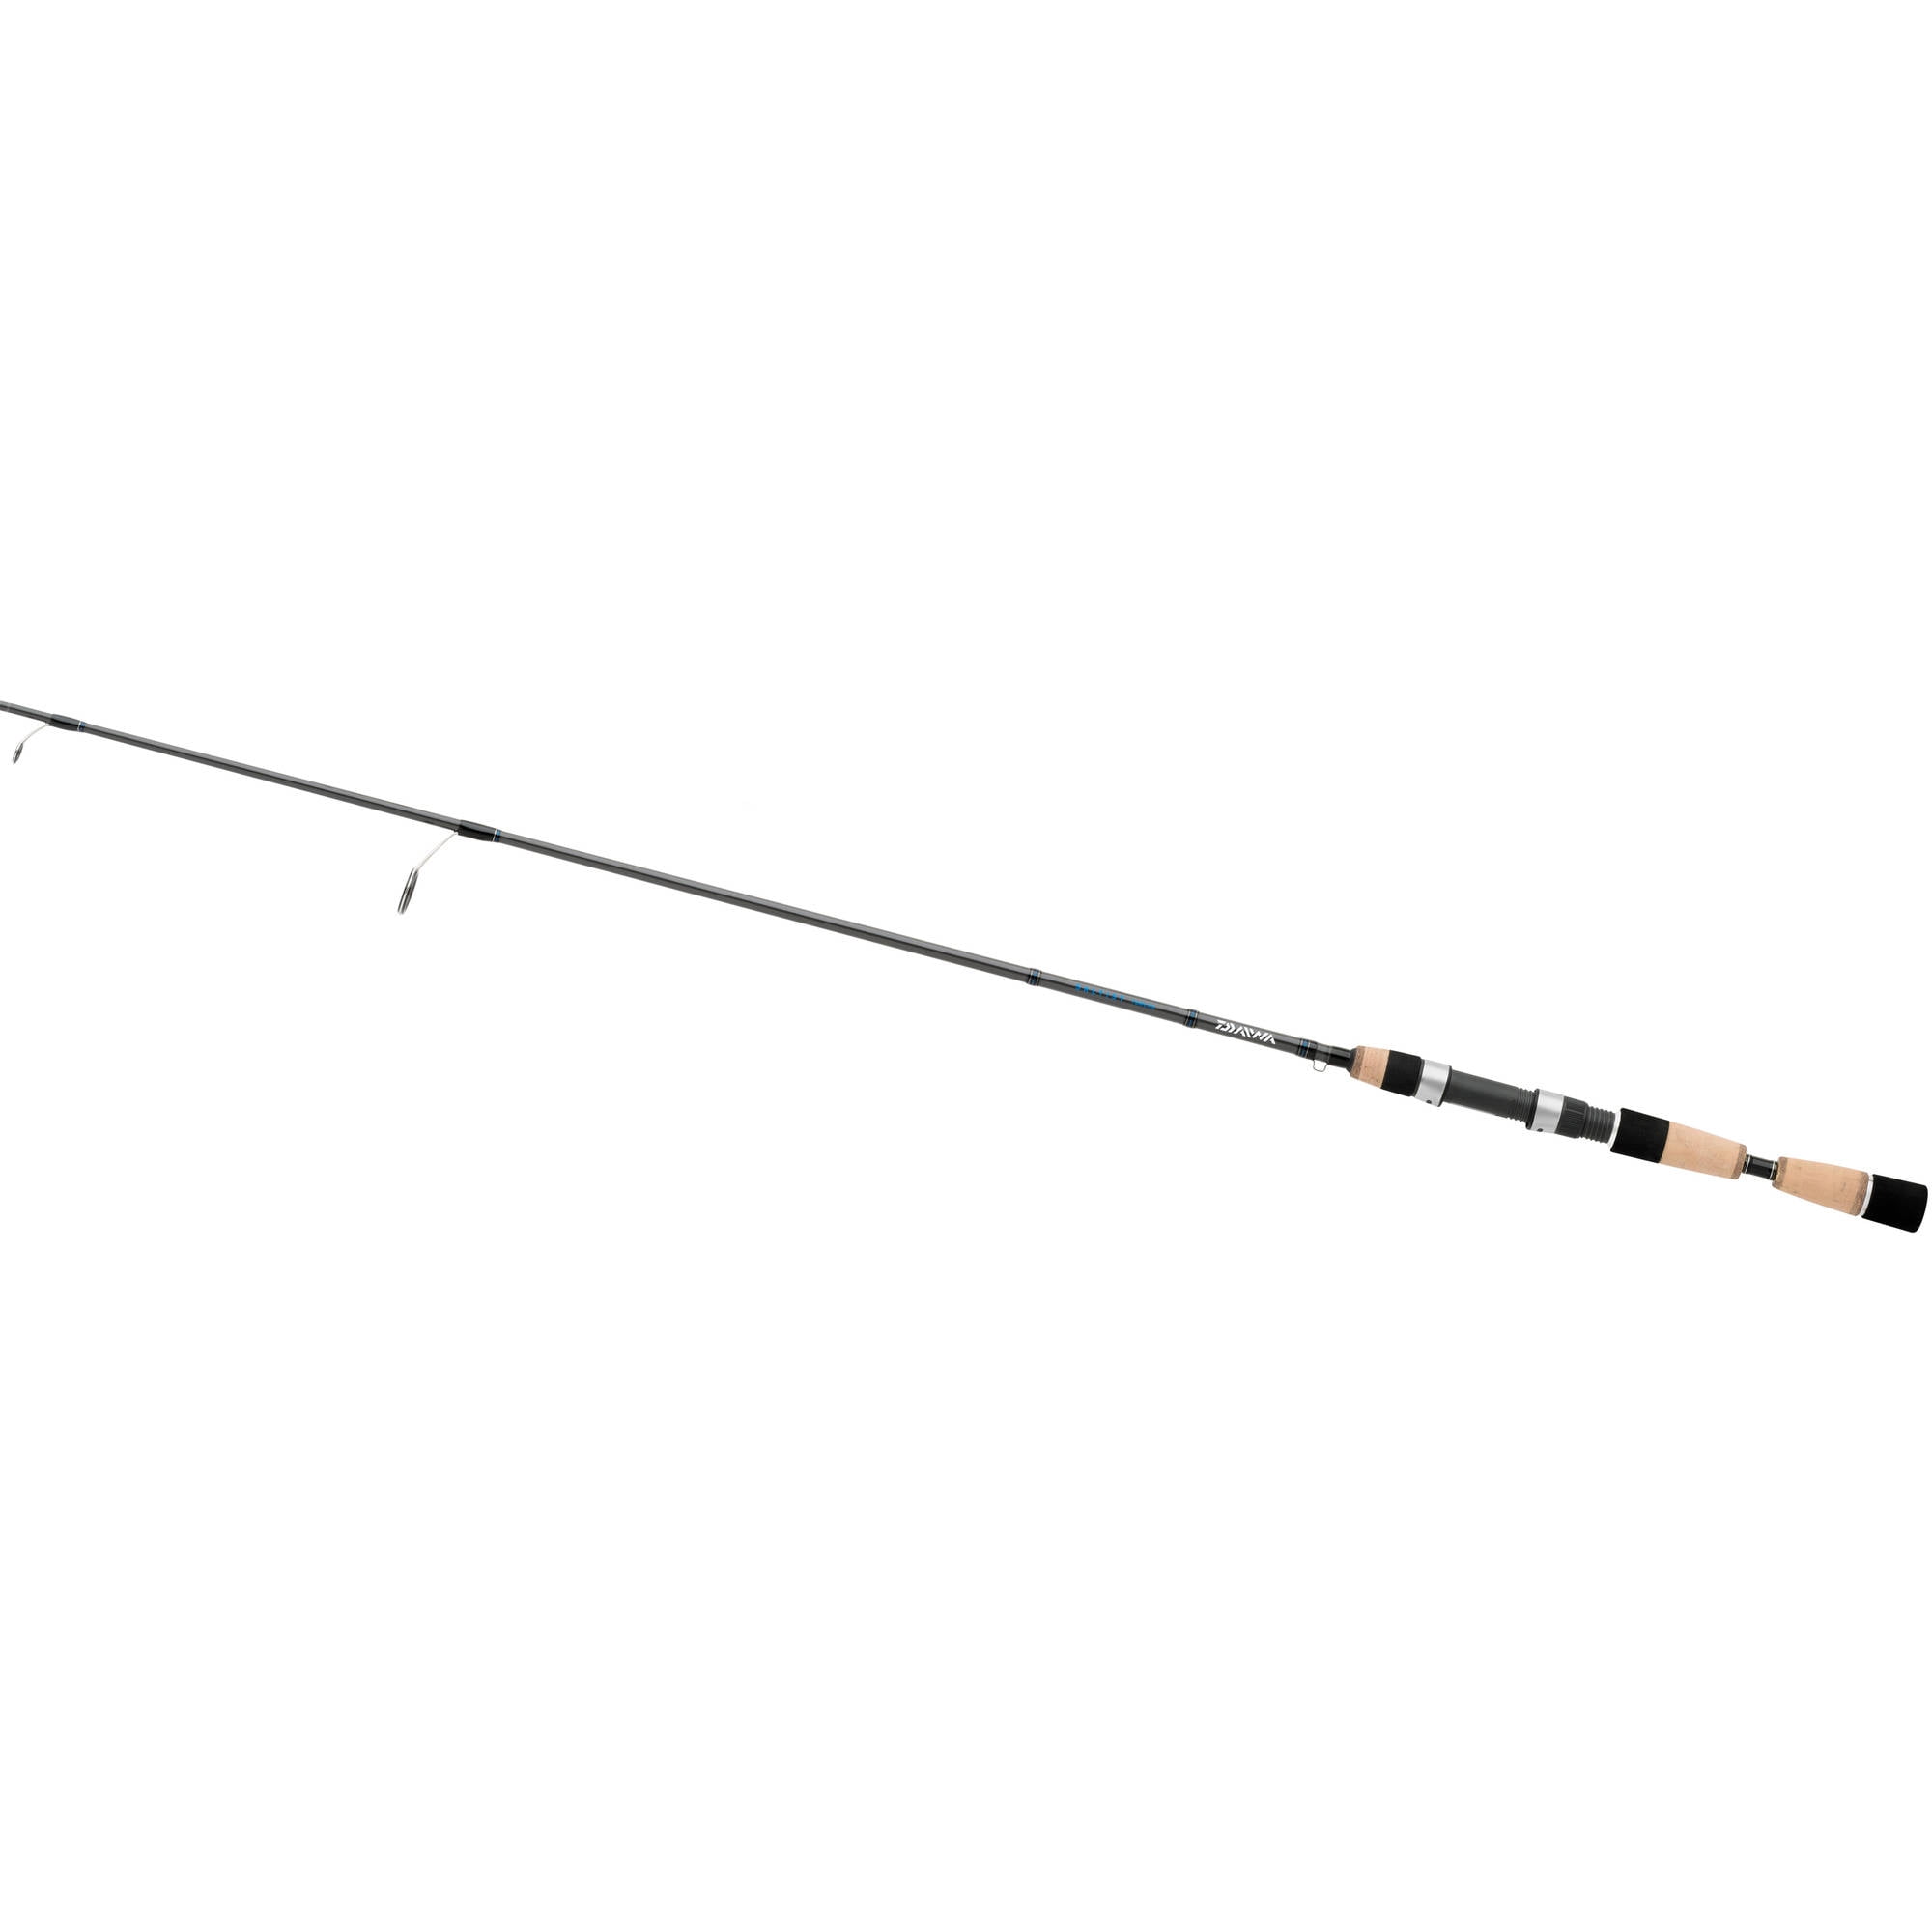 Agility Spinning Rod 8' Casting Weight 15-40g 4Sec Fast Action MH Power Inshore 